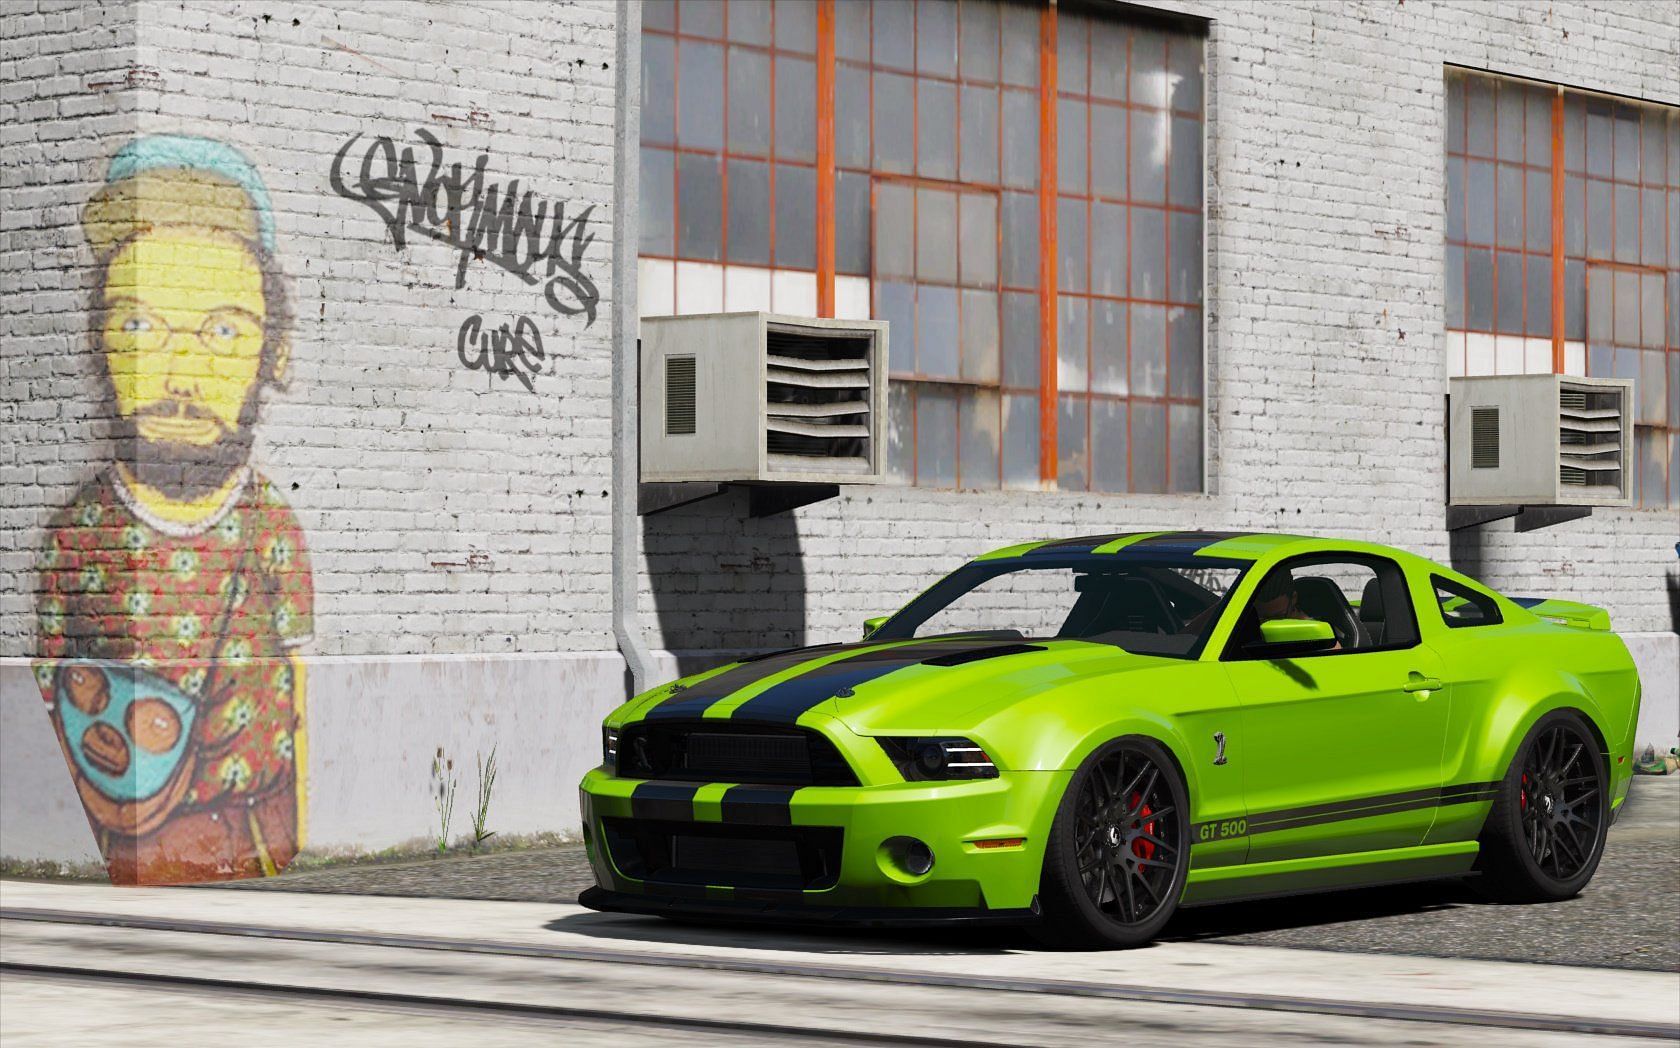 The Ford Mustang GT NFS model in Grand Theft Auto 5 (Image via gta5-mods.com)